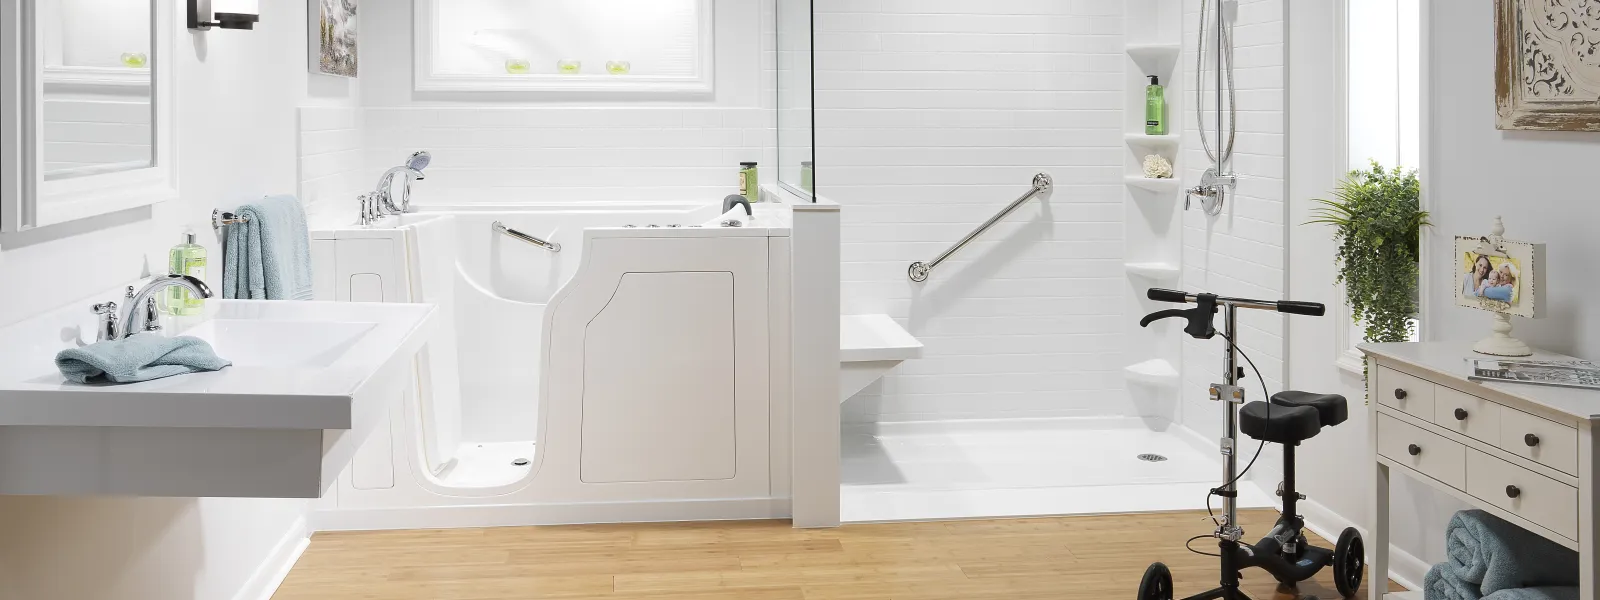 5 Walk-In Tub Features You Might Not Know About